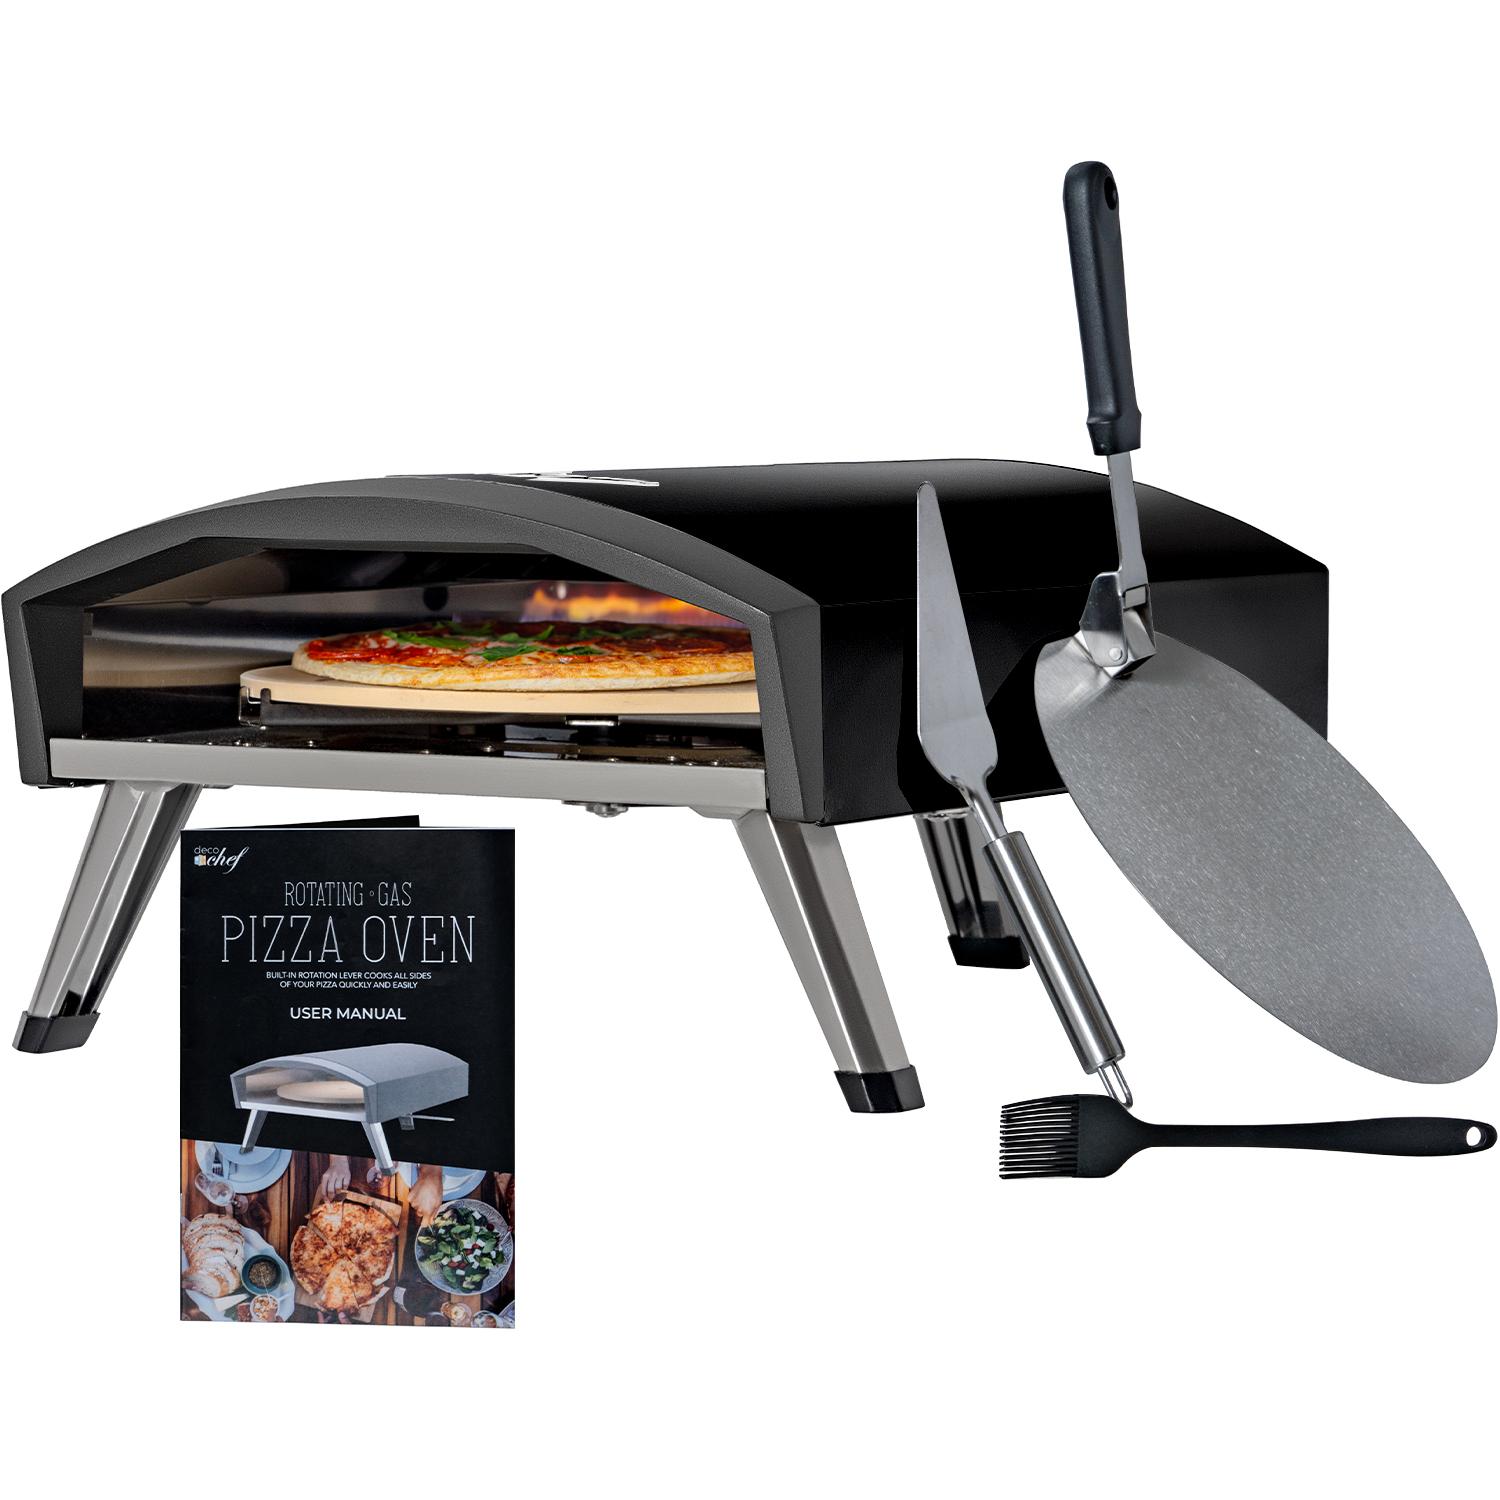 Deco Chef Outdoor Gas Pizza Oven for $149.99 Shipped